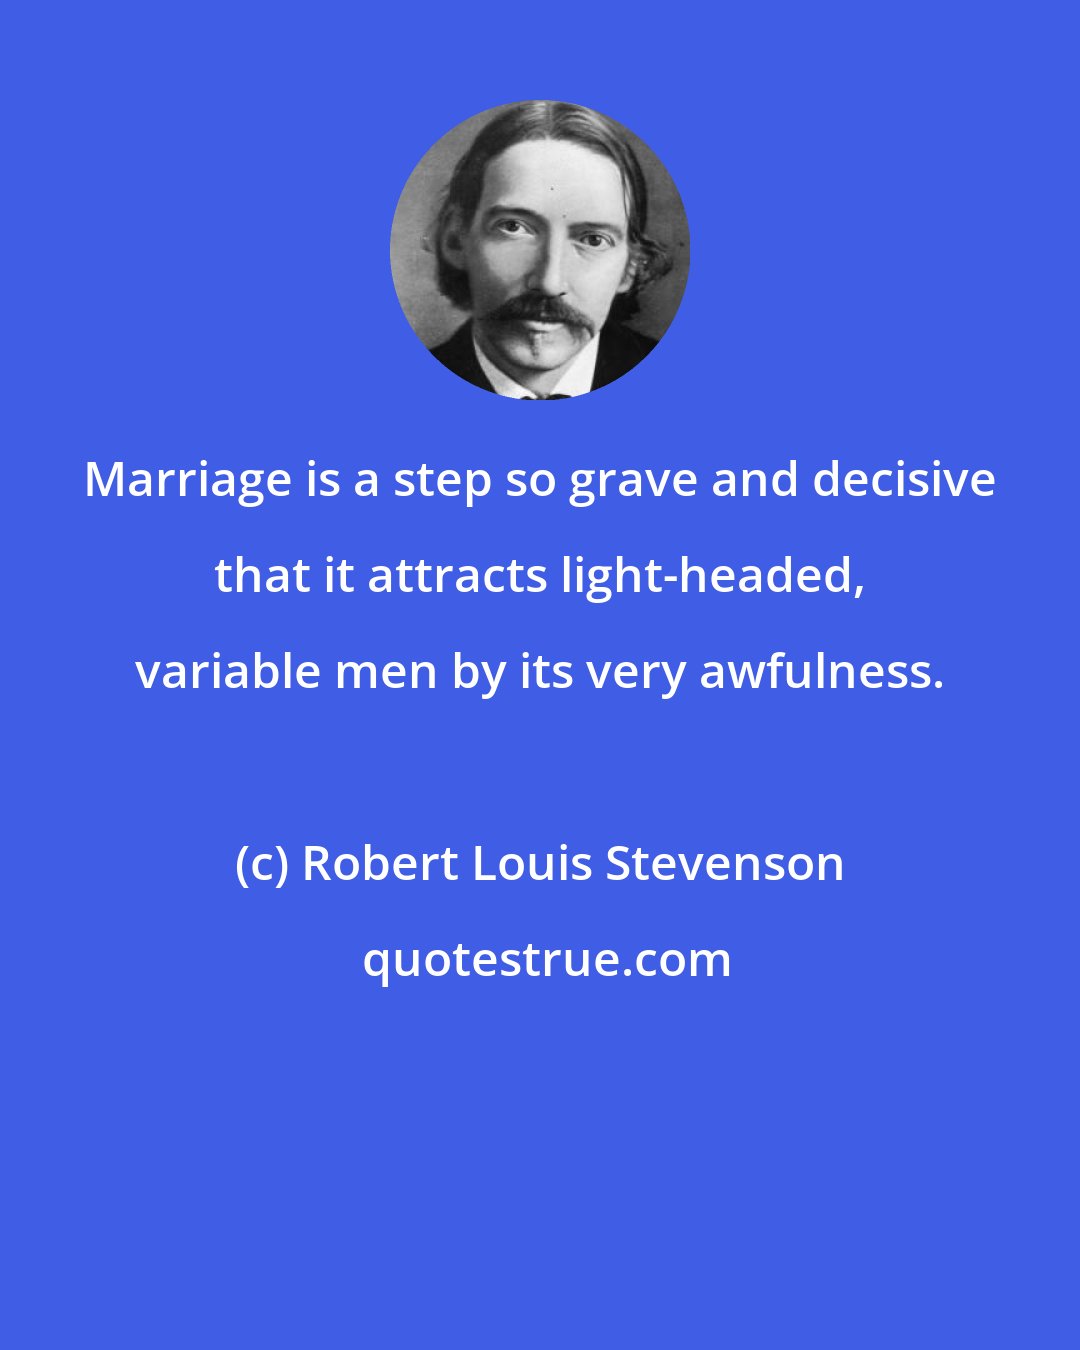 Robert Louis Stevenson: Marriage is a step so grave and decisive that it attracts light-headed, variable men by its very awfulness.